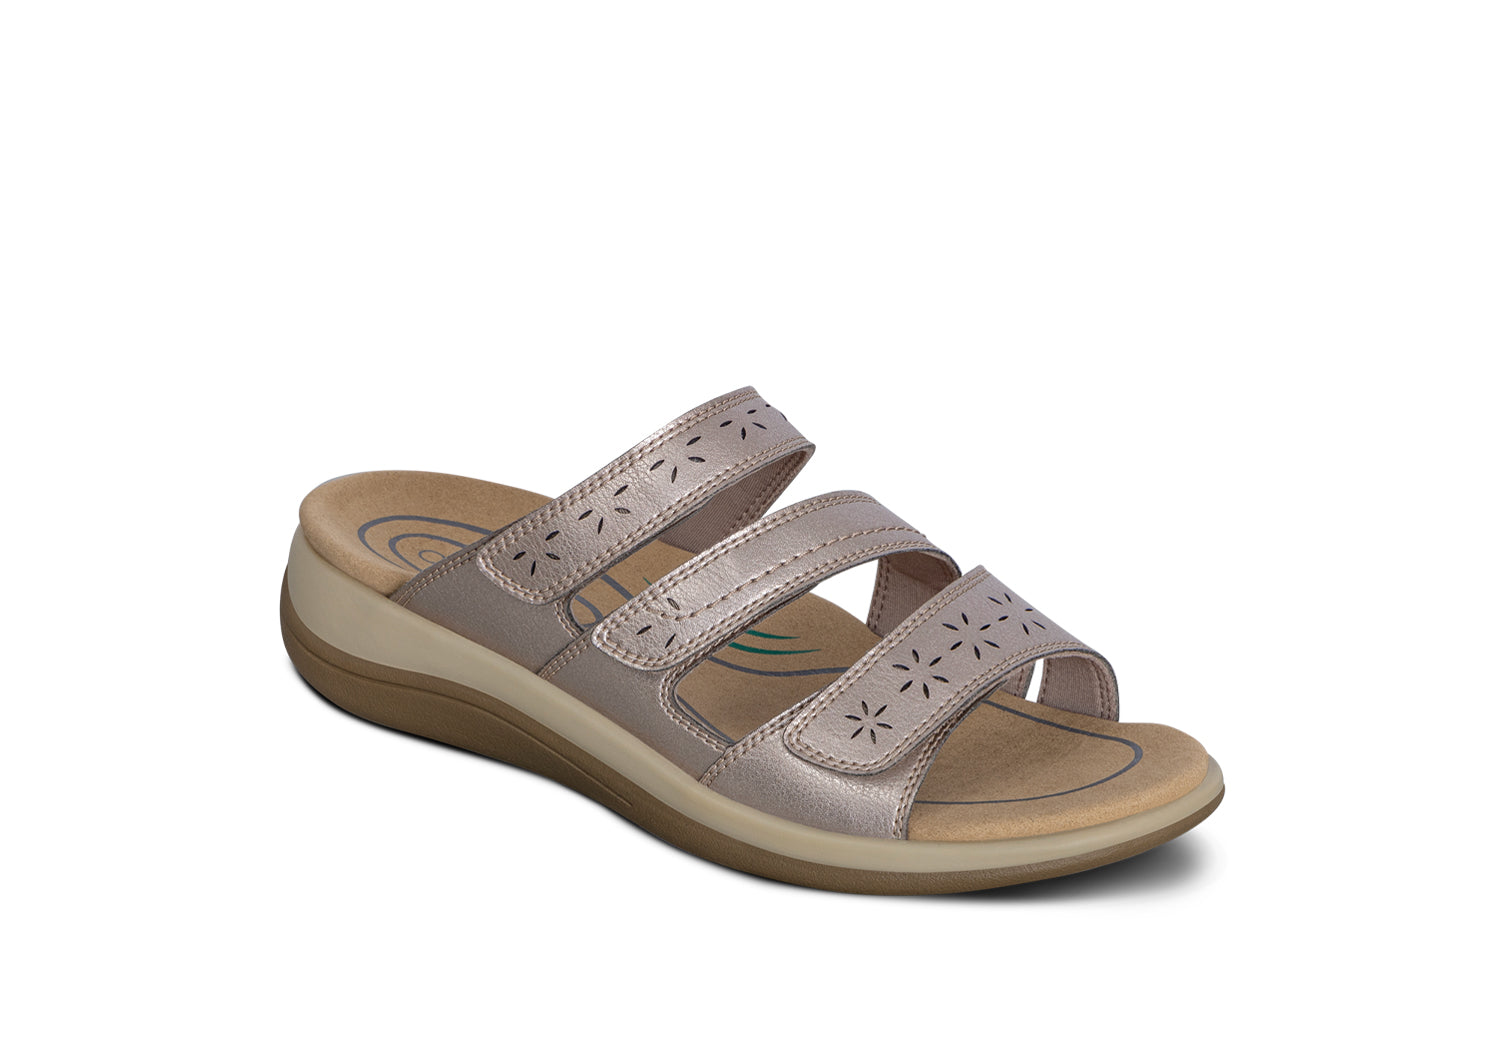 Women's Arch Support Slide Orthotic Sandals | Orthofeet Sahara Gray